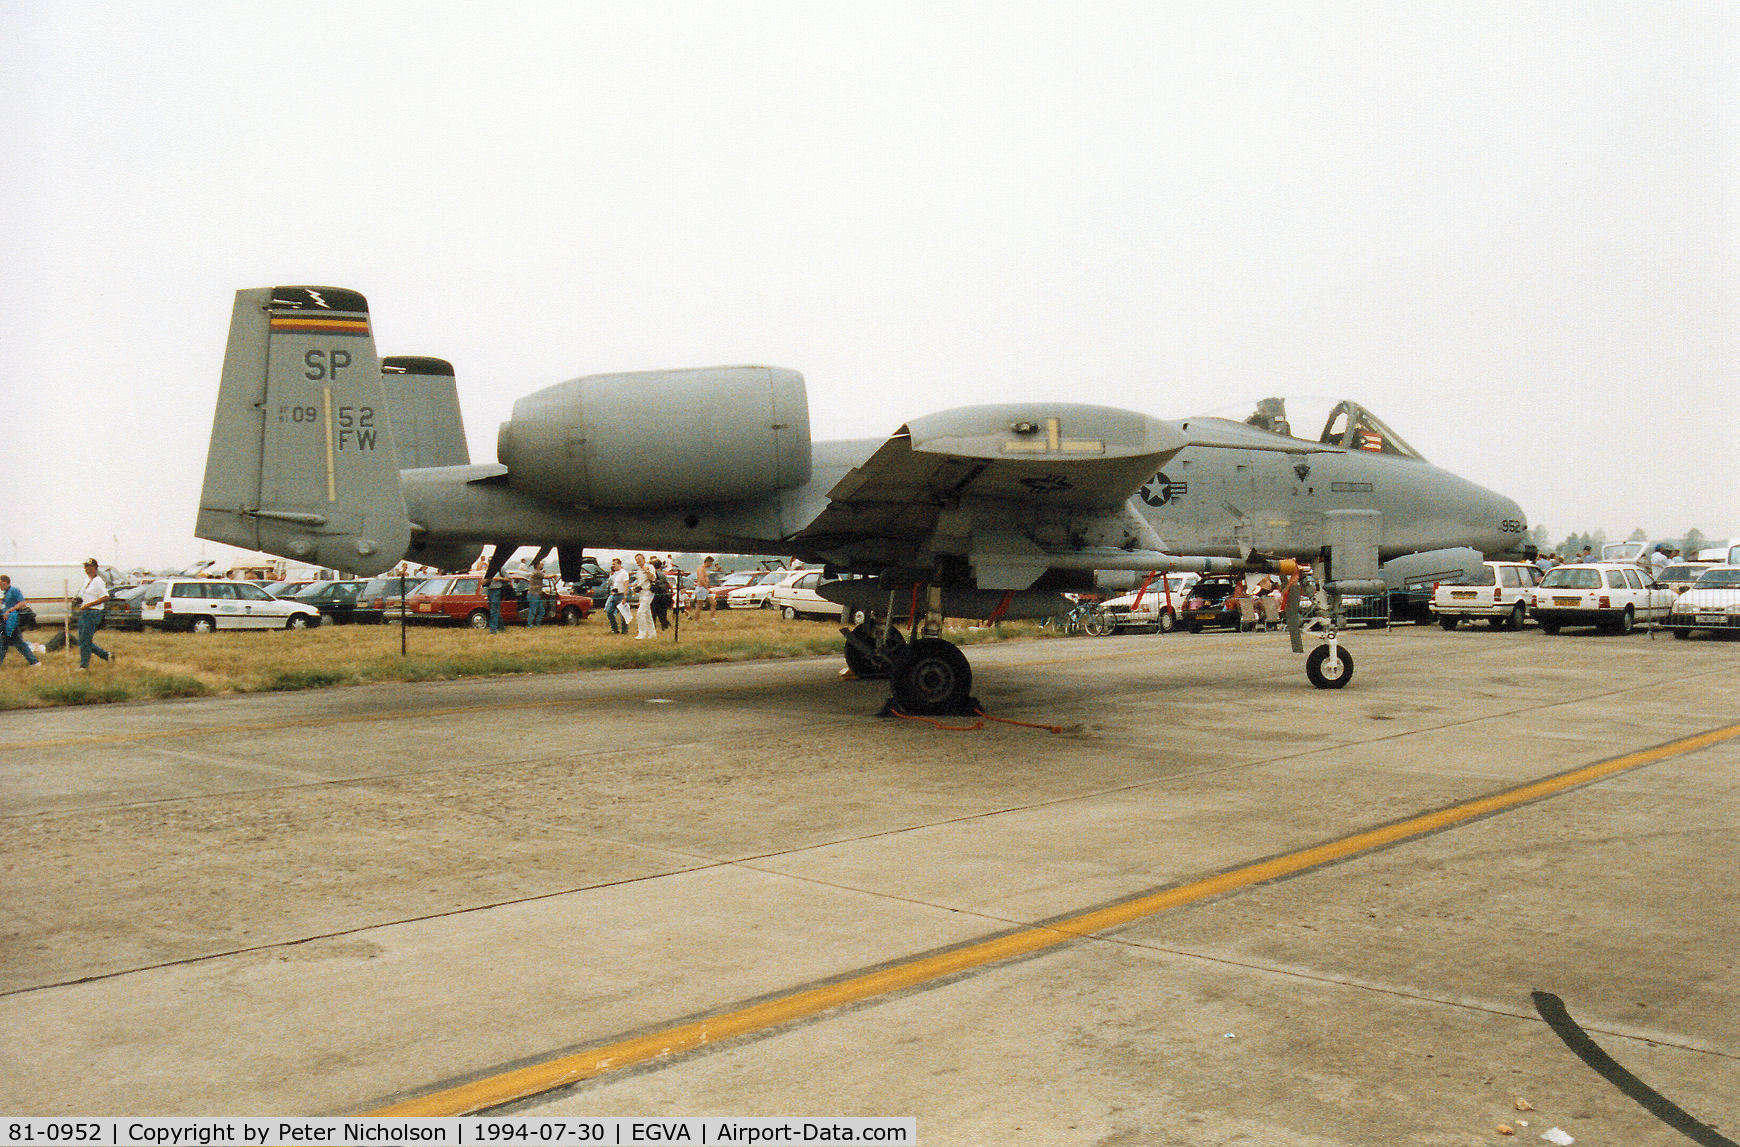 81-0952, 1981 Fairchild Republic A-10A Thunderbolt II C/N A10-0647, A-10A Thunderbolt, callsign Warhog 1, of the 81st Fighter Squadron/52nd Fighter Wing on display at the 1994 Intnl Air Tattoo at RAF Fairford.